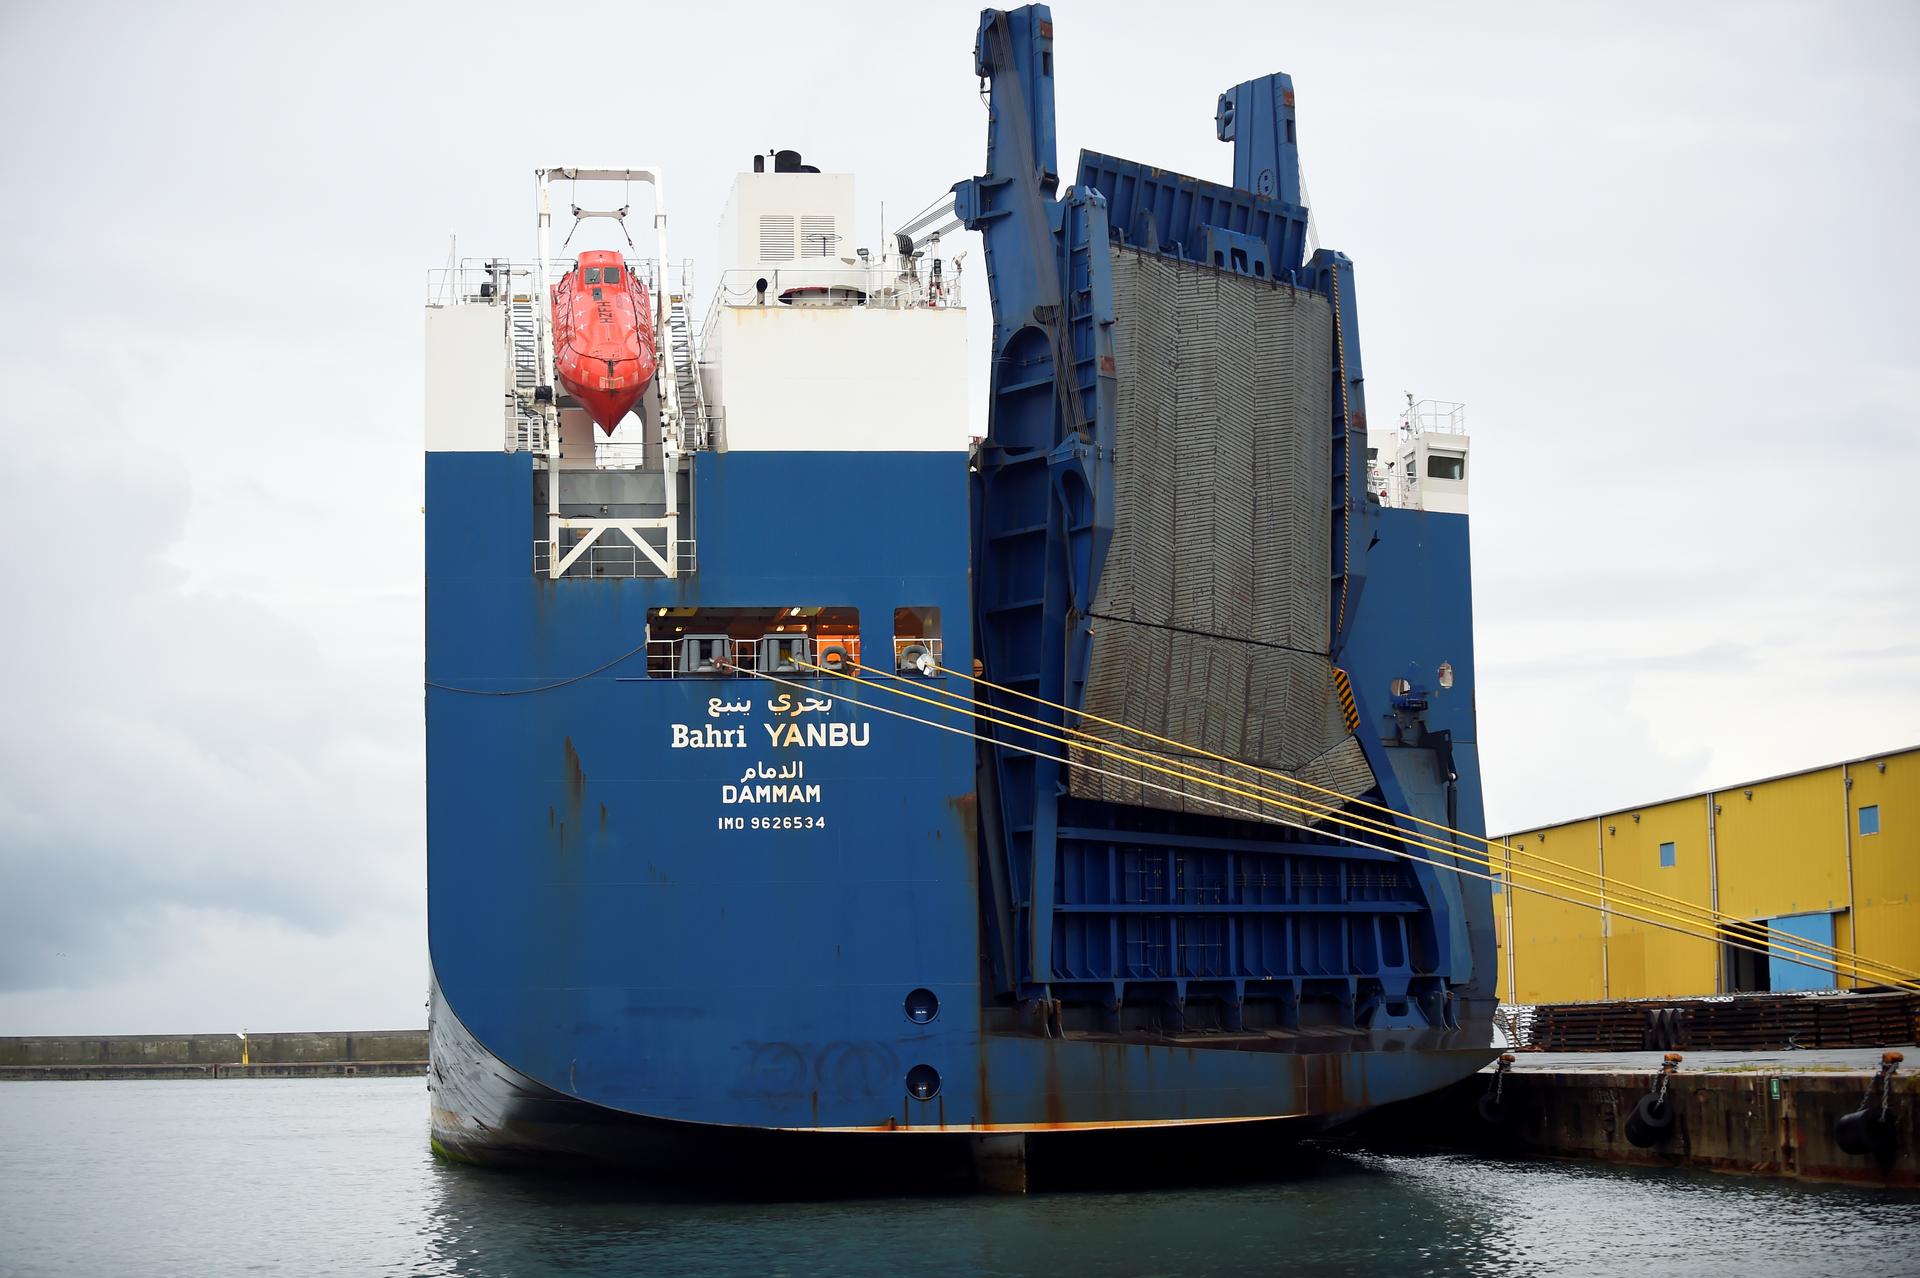 Saudi cargo ship Bahri Yanbu, that was prevented by French rights group ACAT from loading a weapons cargo at the French port of Le Havre due to concerns they might be used against civilians in Yemen, is seen at the Port of Genoa, Italy May 20, 2019. 